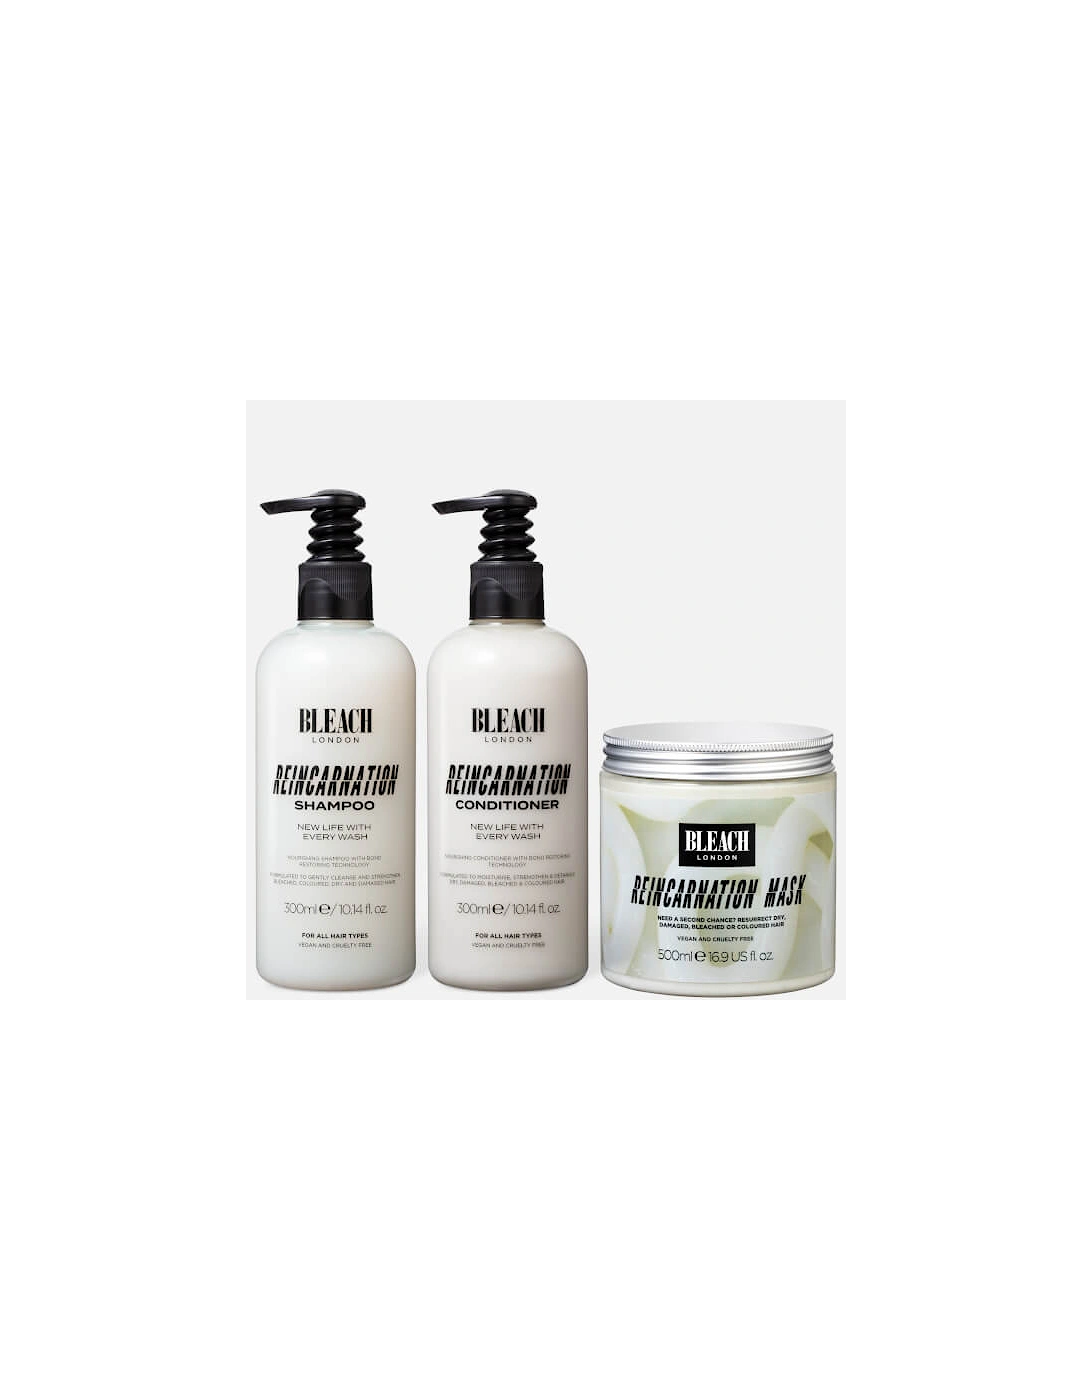 Bleach Reincarnation Shampoo and Conditioner 300ml Bundle with 500ml Reincarnation Mask, 2 of 1